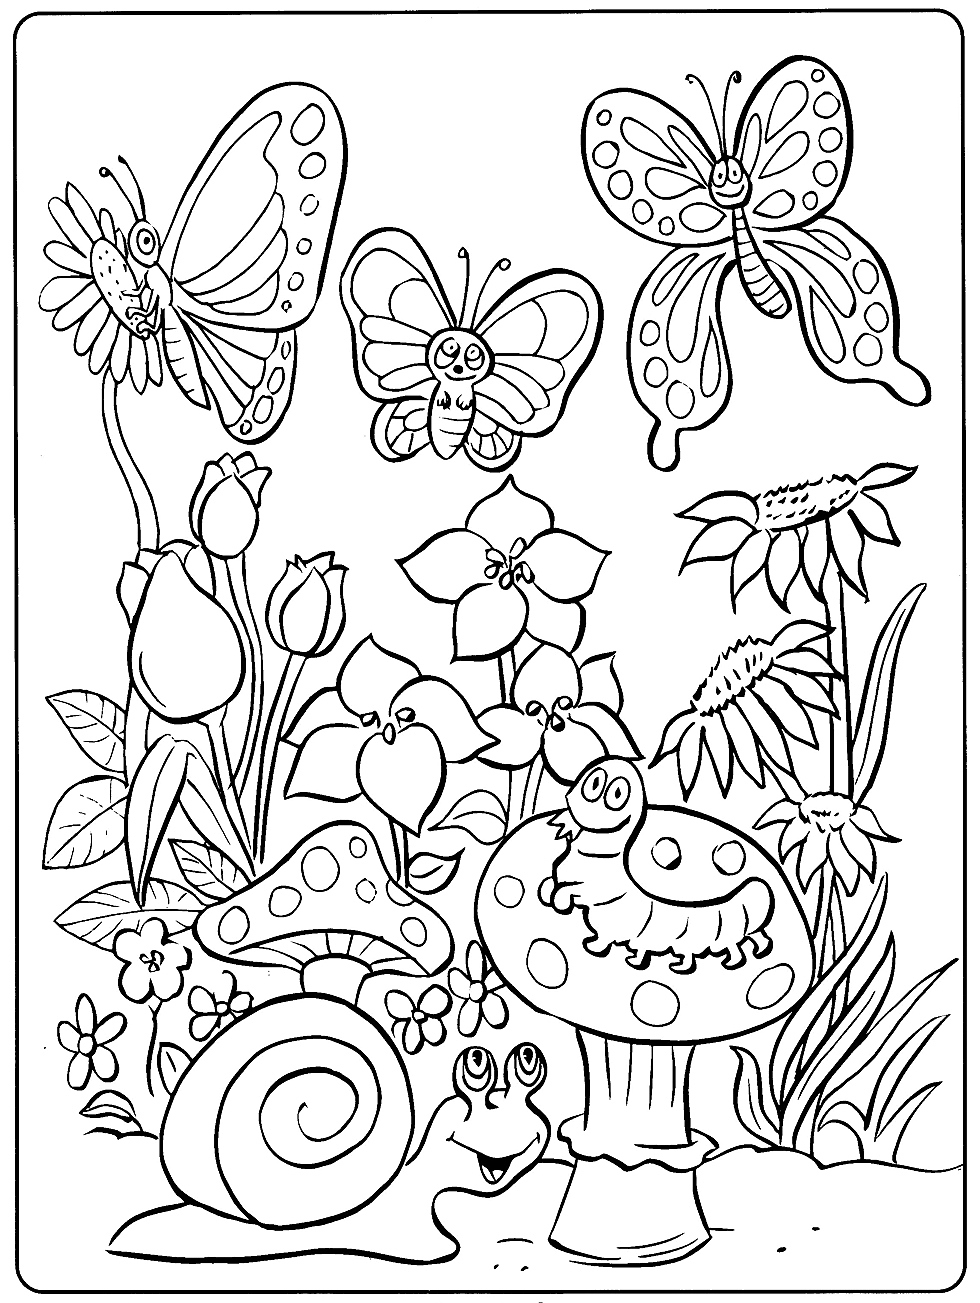 Toddler animal coloring pages